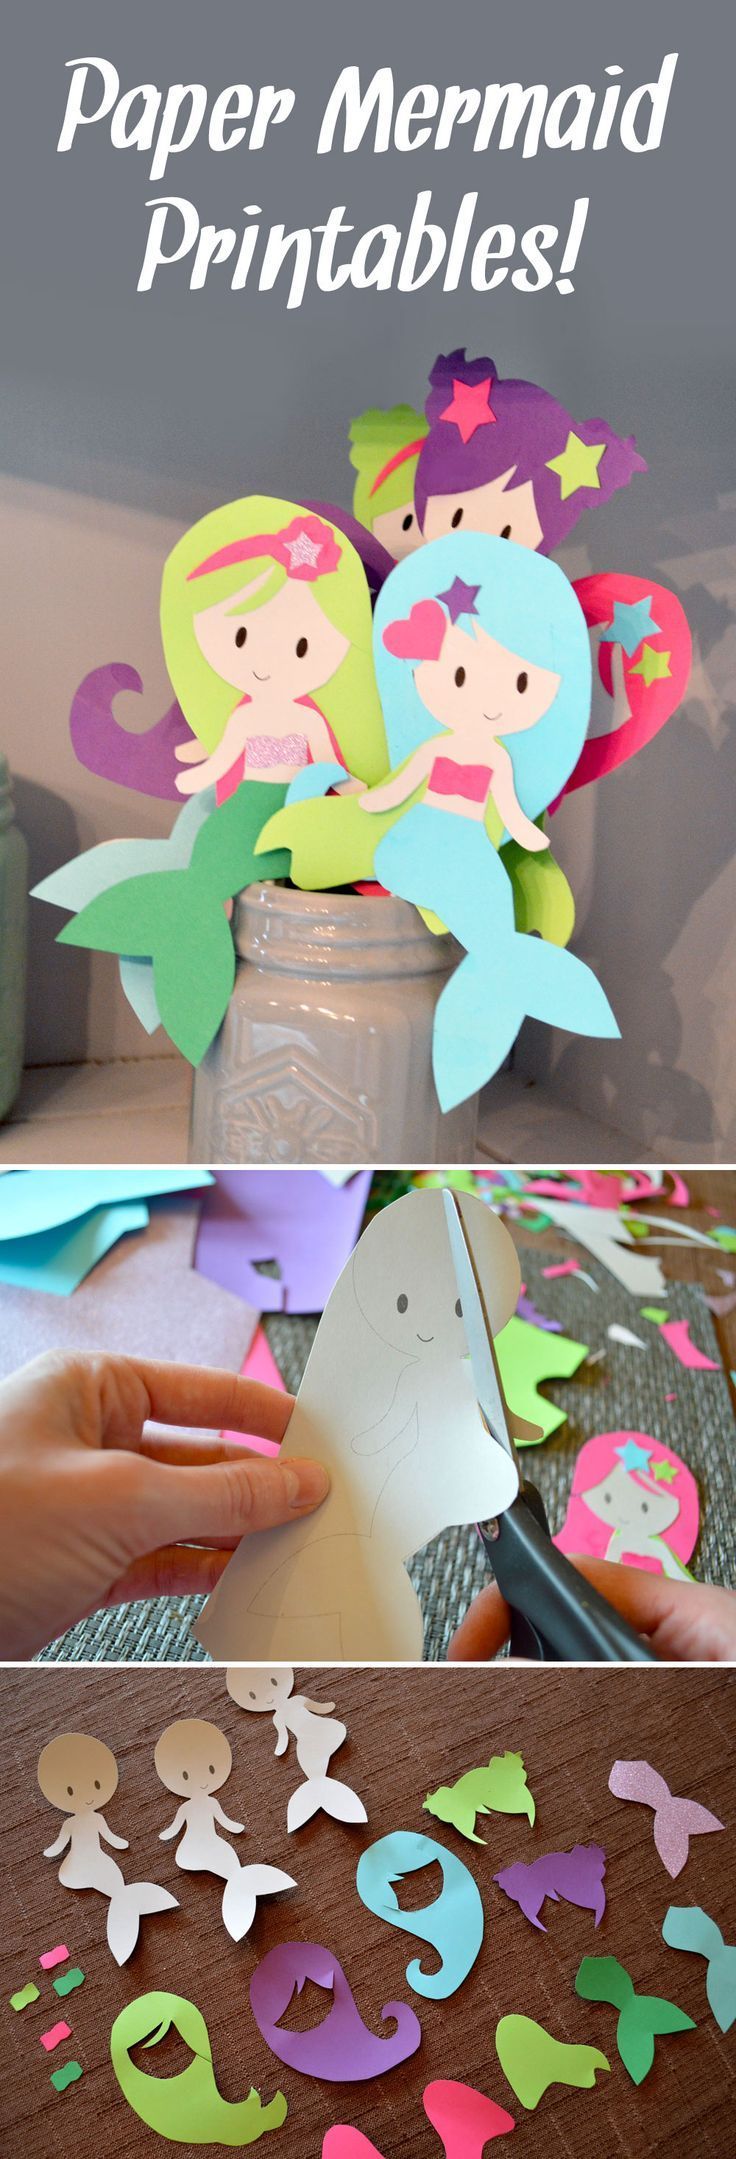 Easily make colorful paper mermaids with our cute printables!